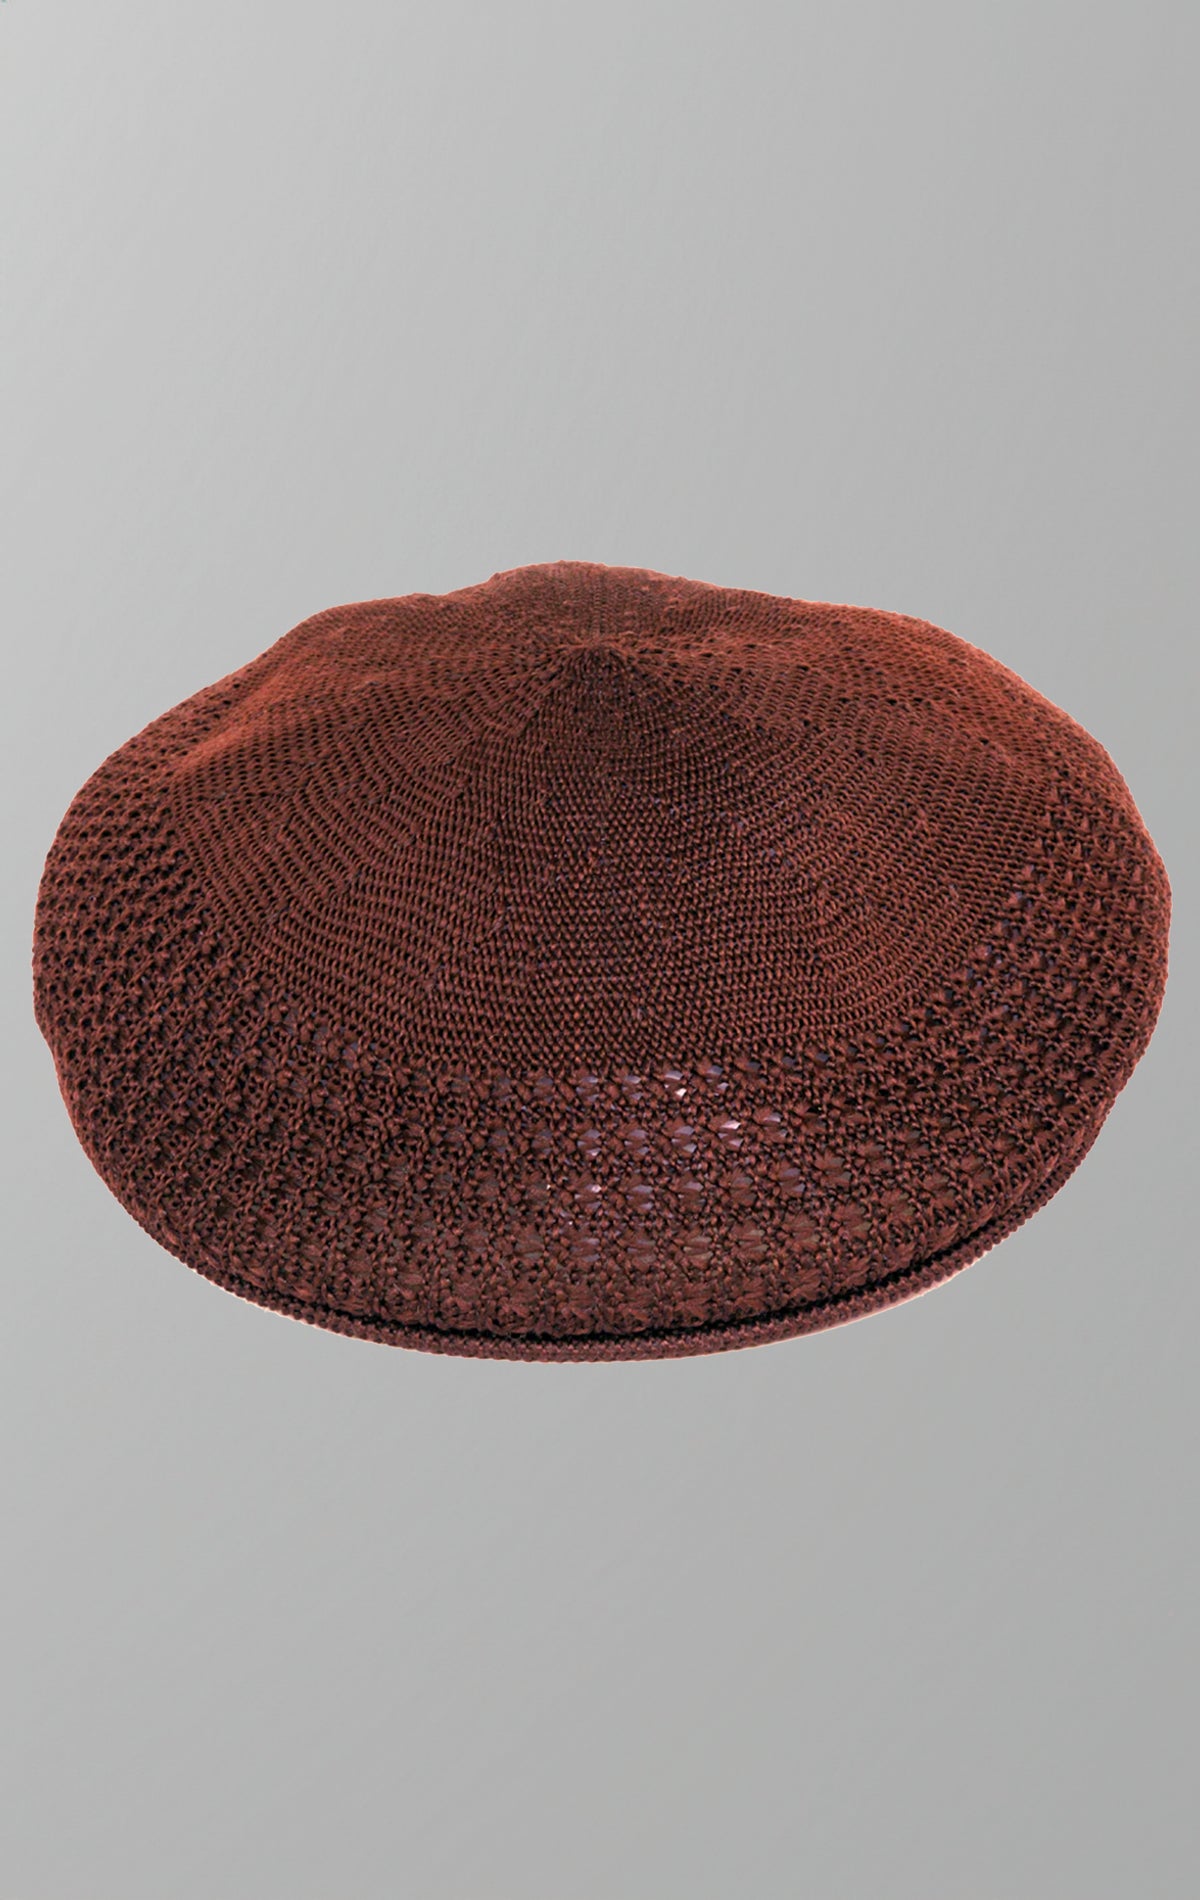 Bruno Capelo Vented Mesh Knit Ivy Cap with 2-inch brim, available in sizes S-XL